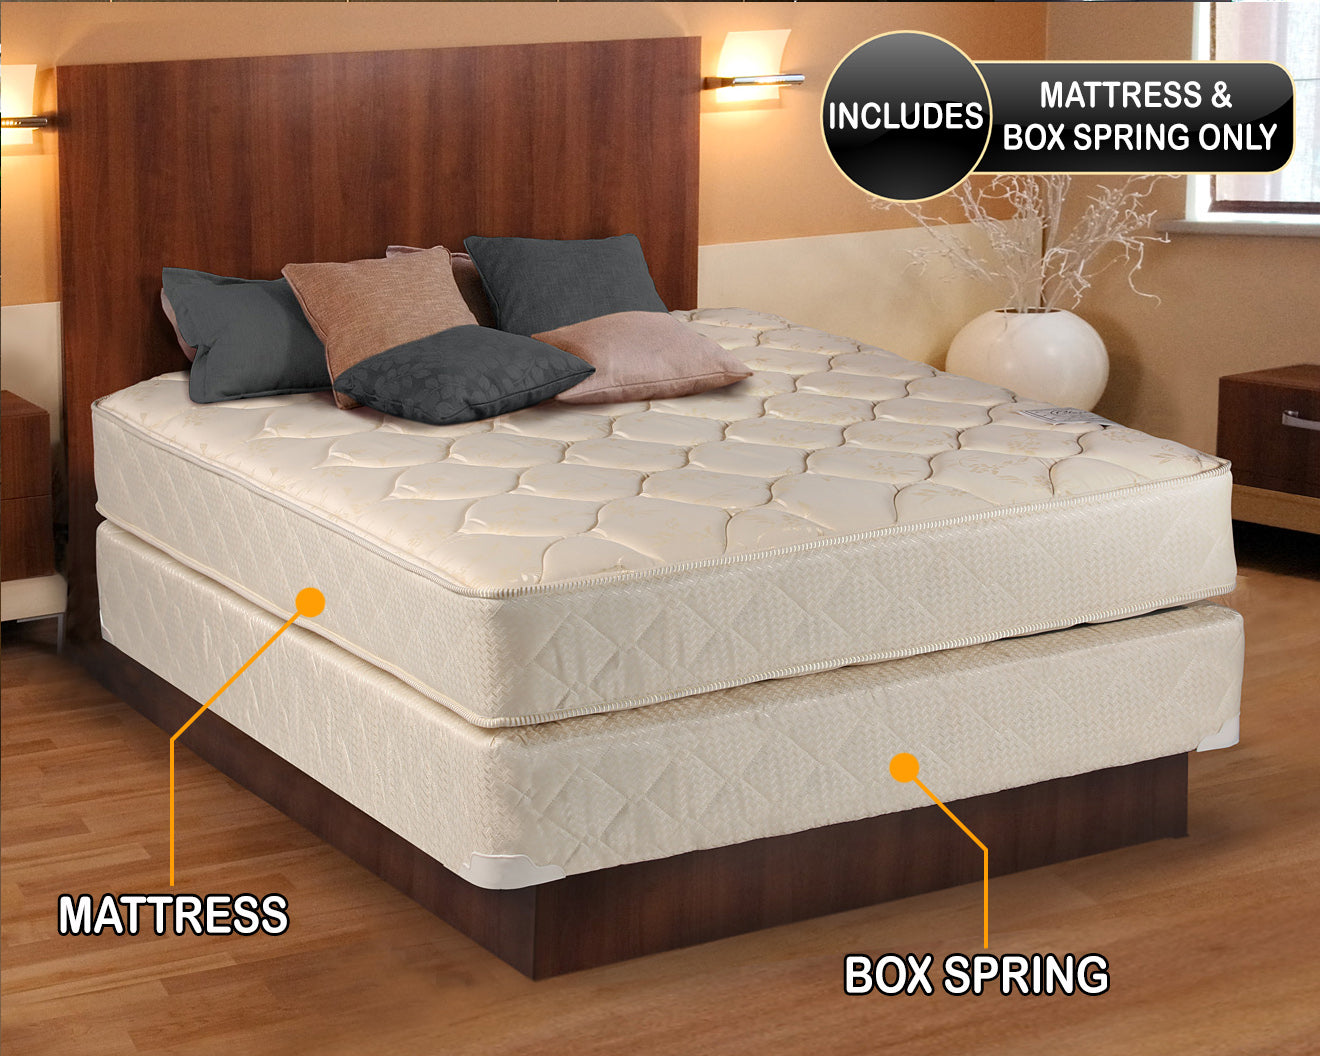 Comfort Classic Gentle Firm California King Mattress and Box Spring Set - Fully Assembled, Orthopedic, Good for Your Back, Long Lasting and 2 Sided